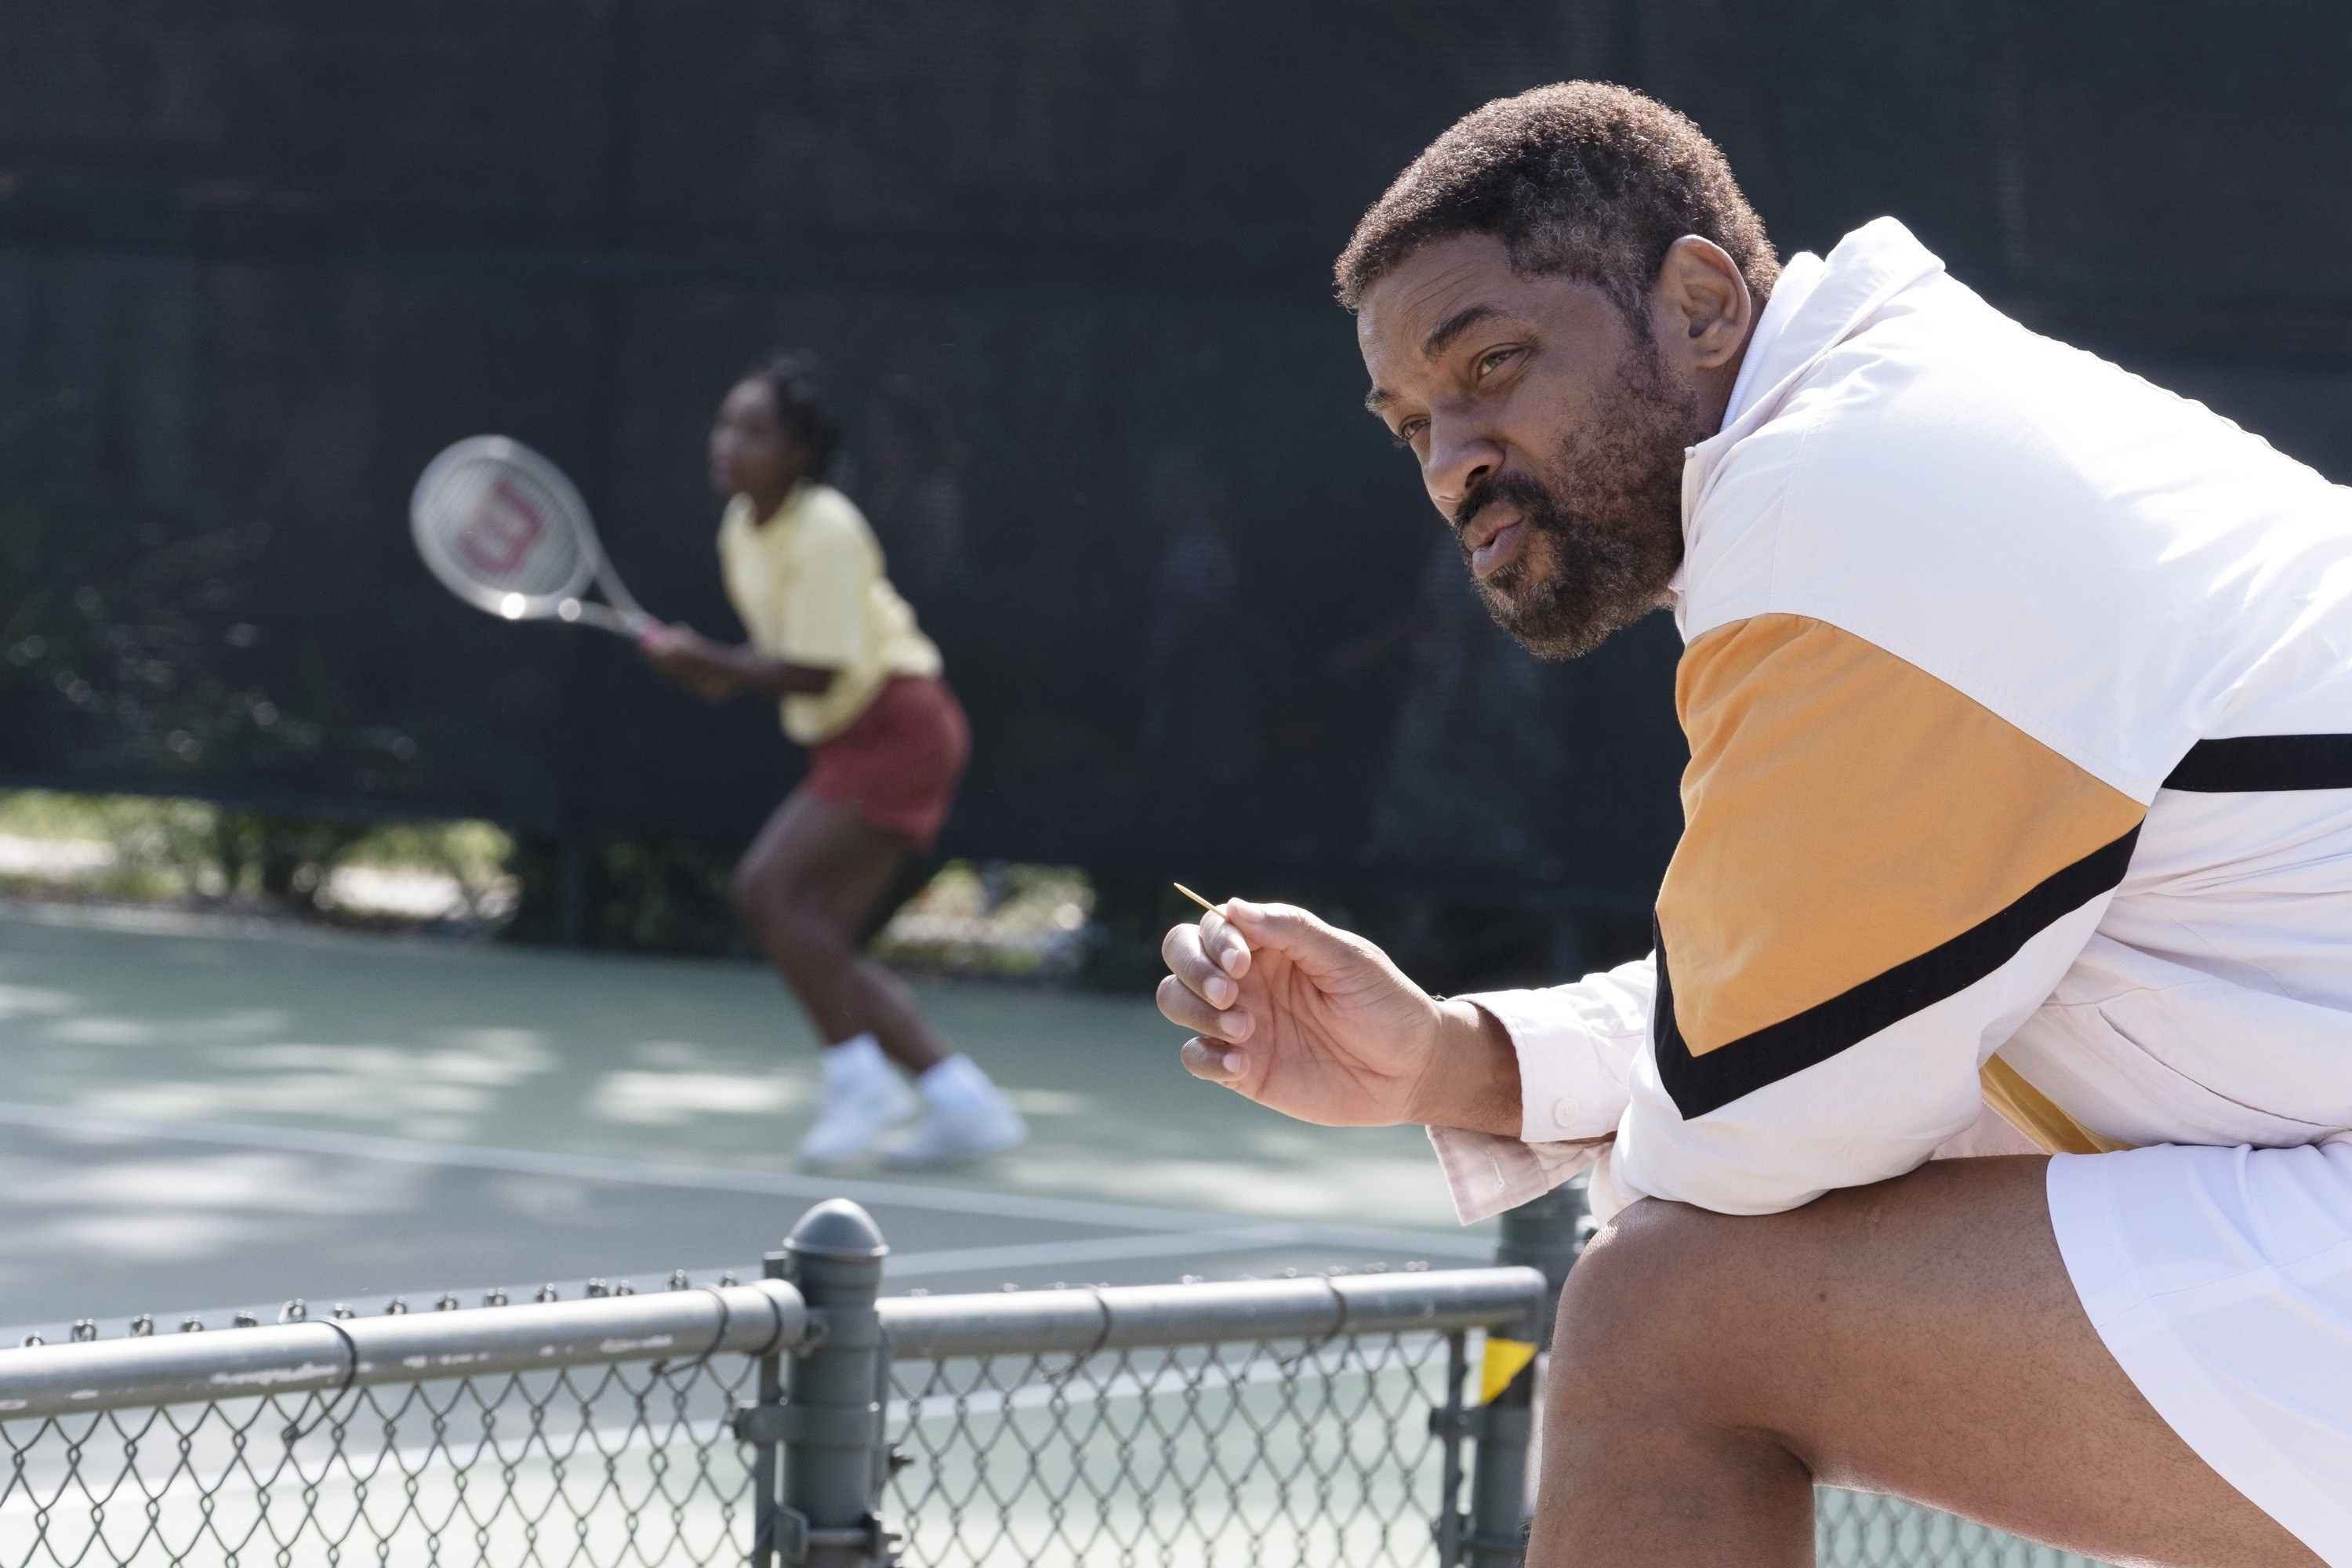 Will Smith smokes a cigarette by a tennis court